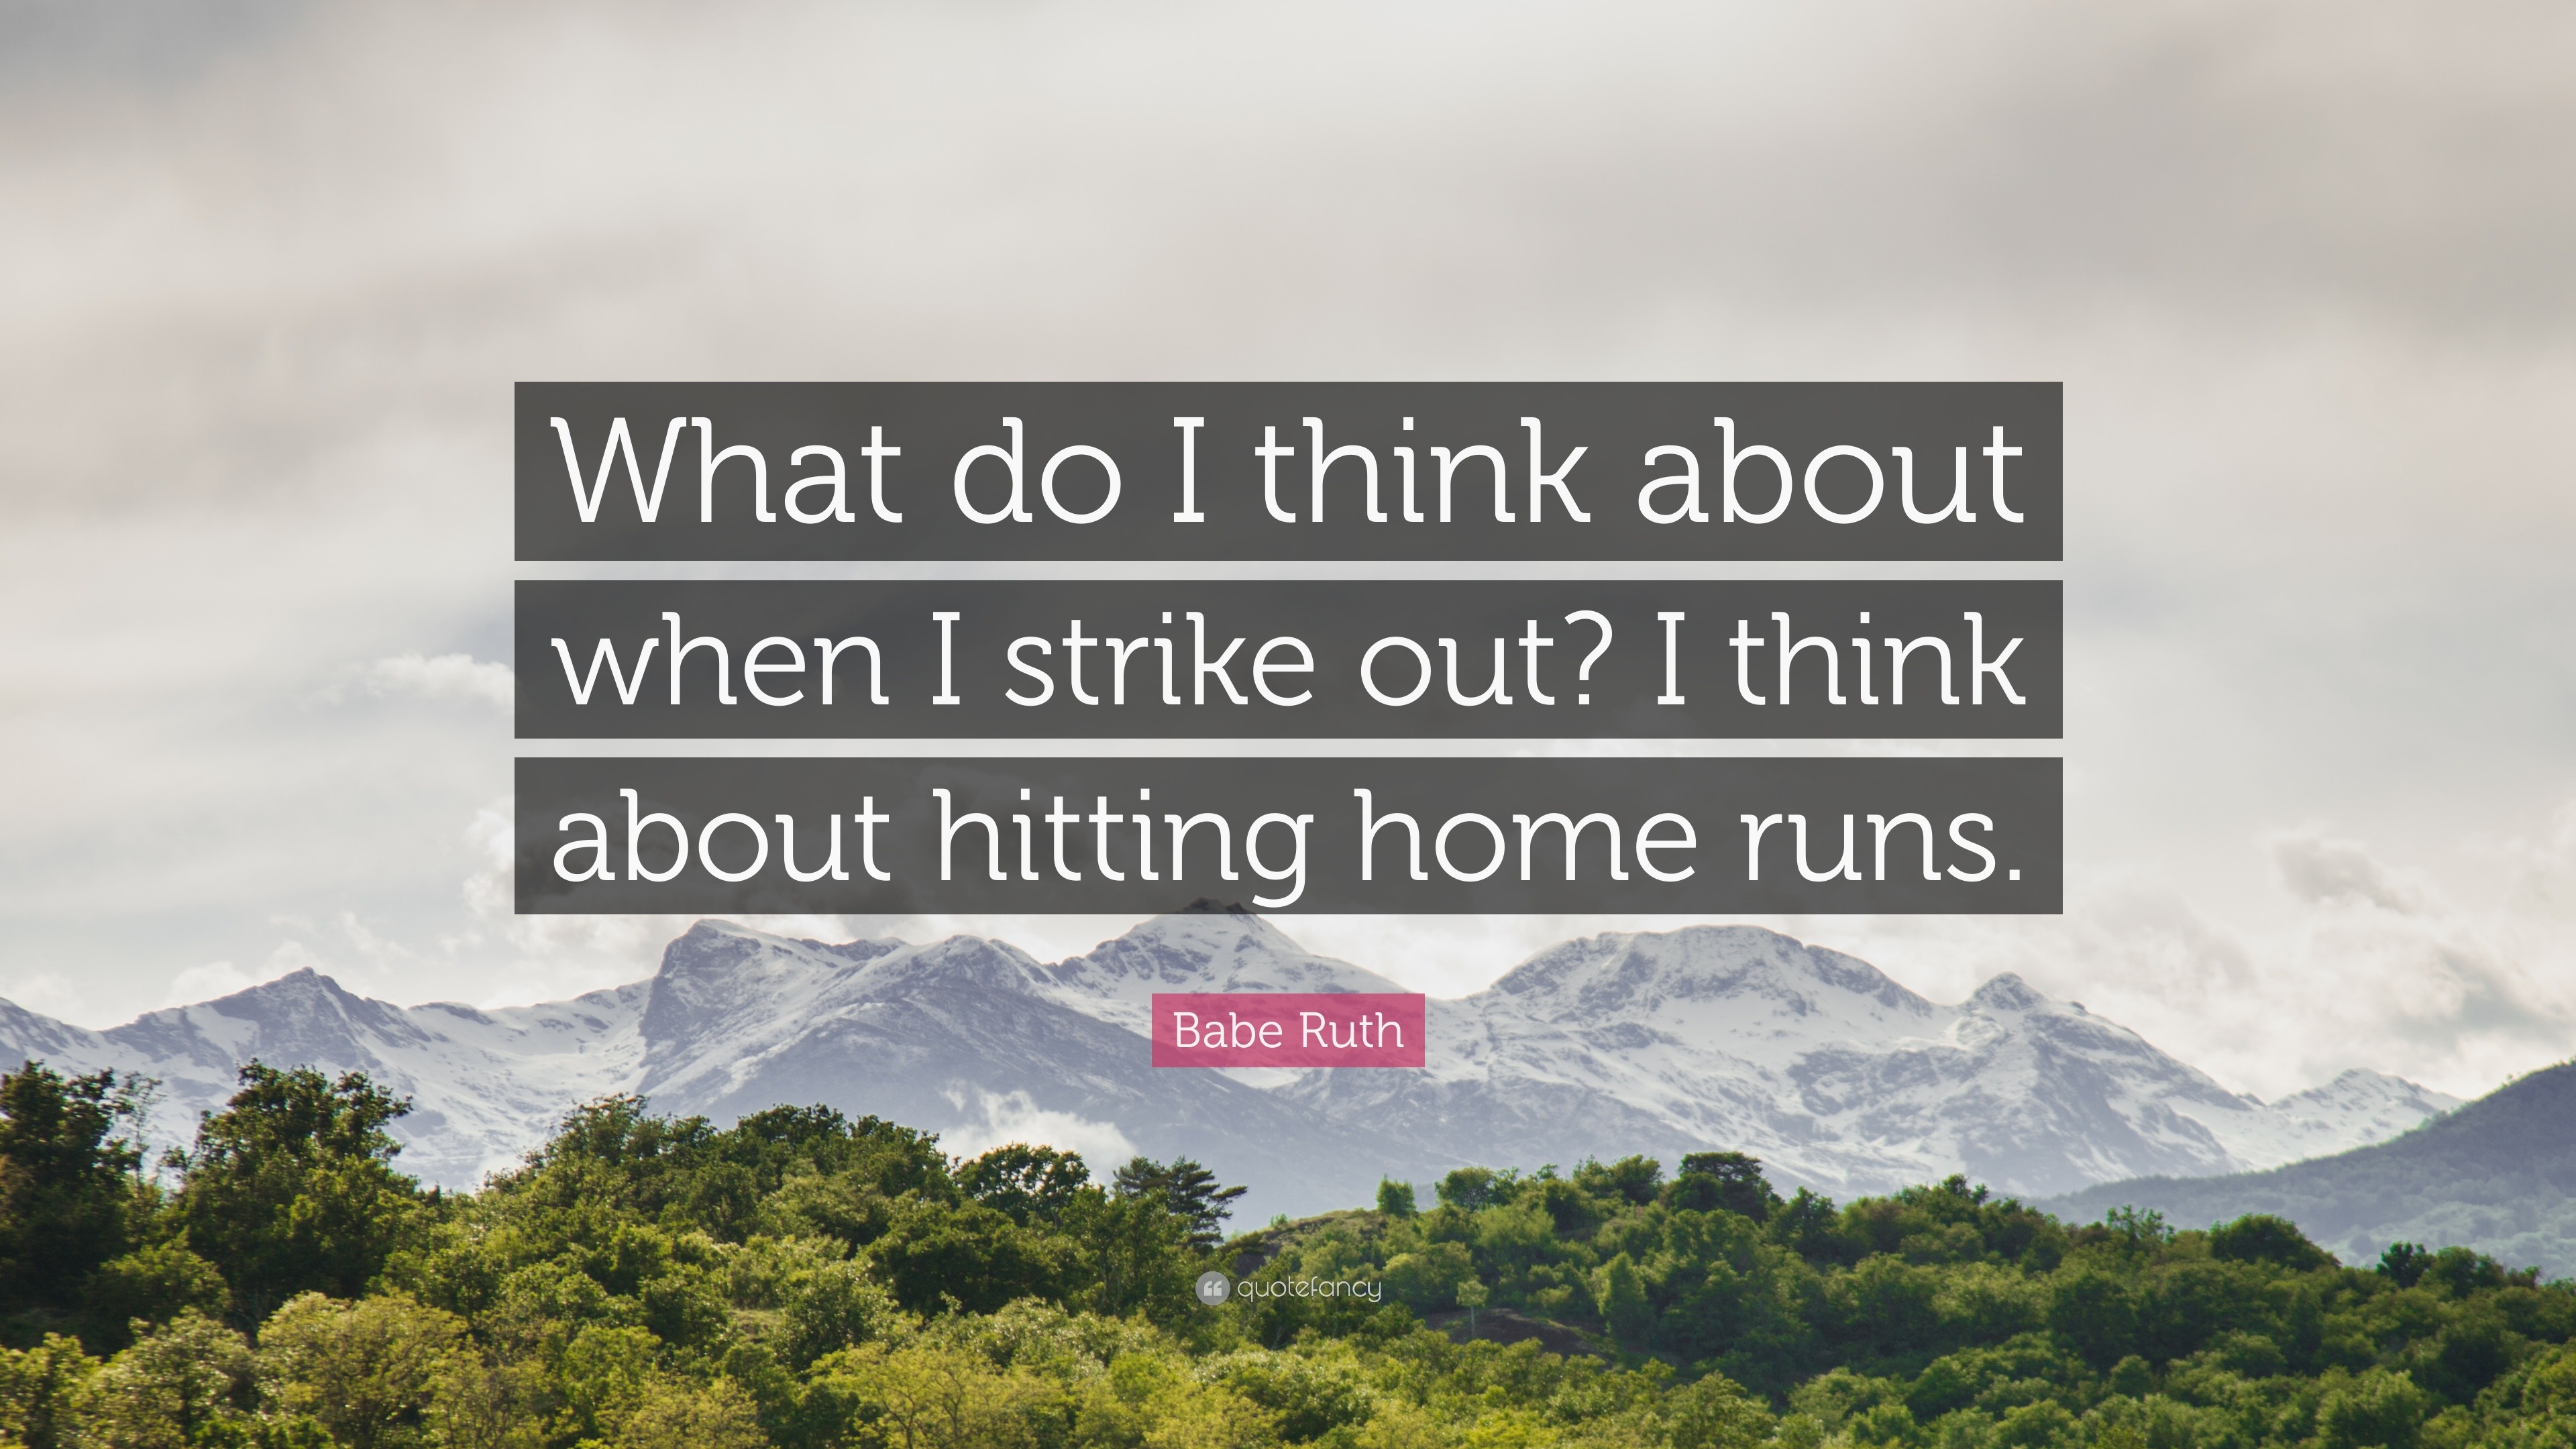 Babe Ruth Quote: “What do I think about when I strike out? I think about  hitting